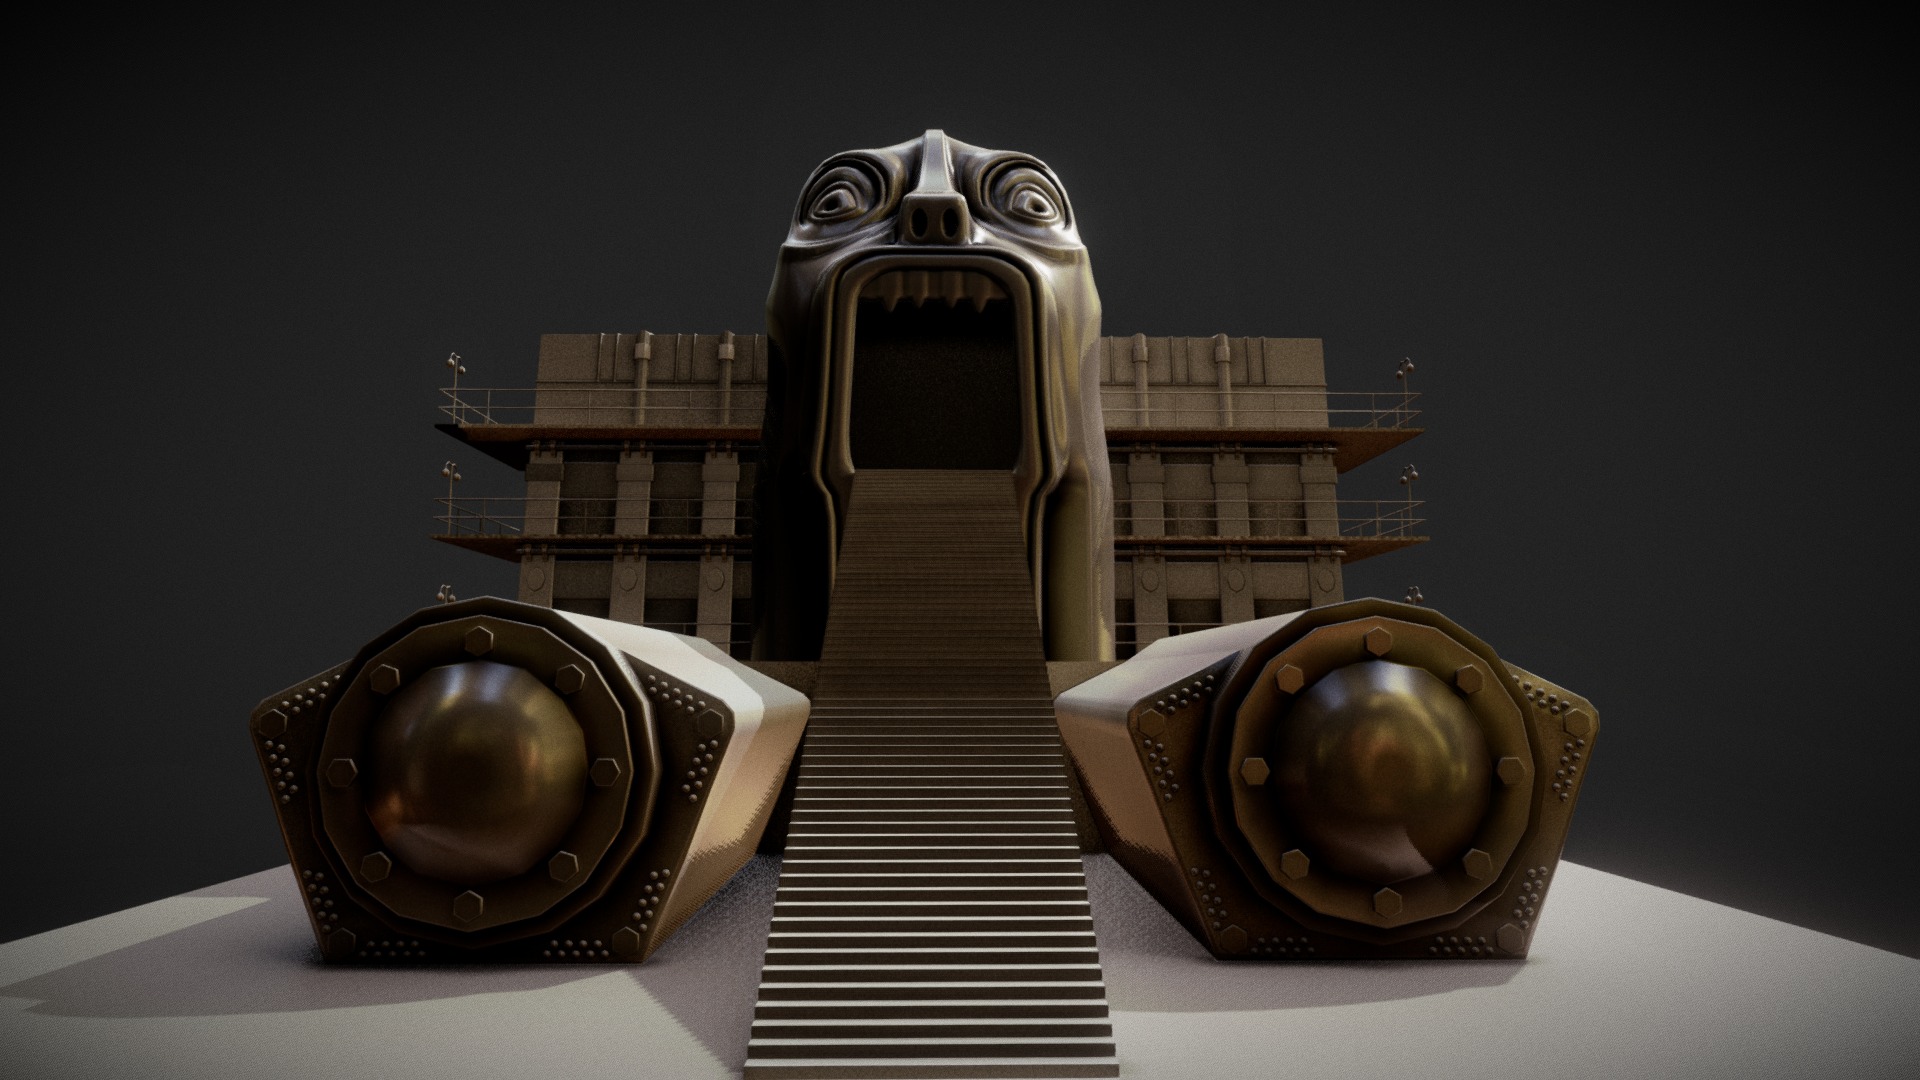 3D model Metropolis – Moloch - This is a 3D model of the Metropolis - Moloch. The 3D model is about a group of gold coins.